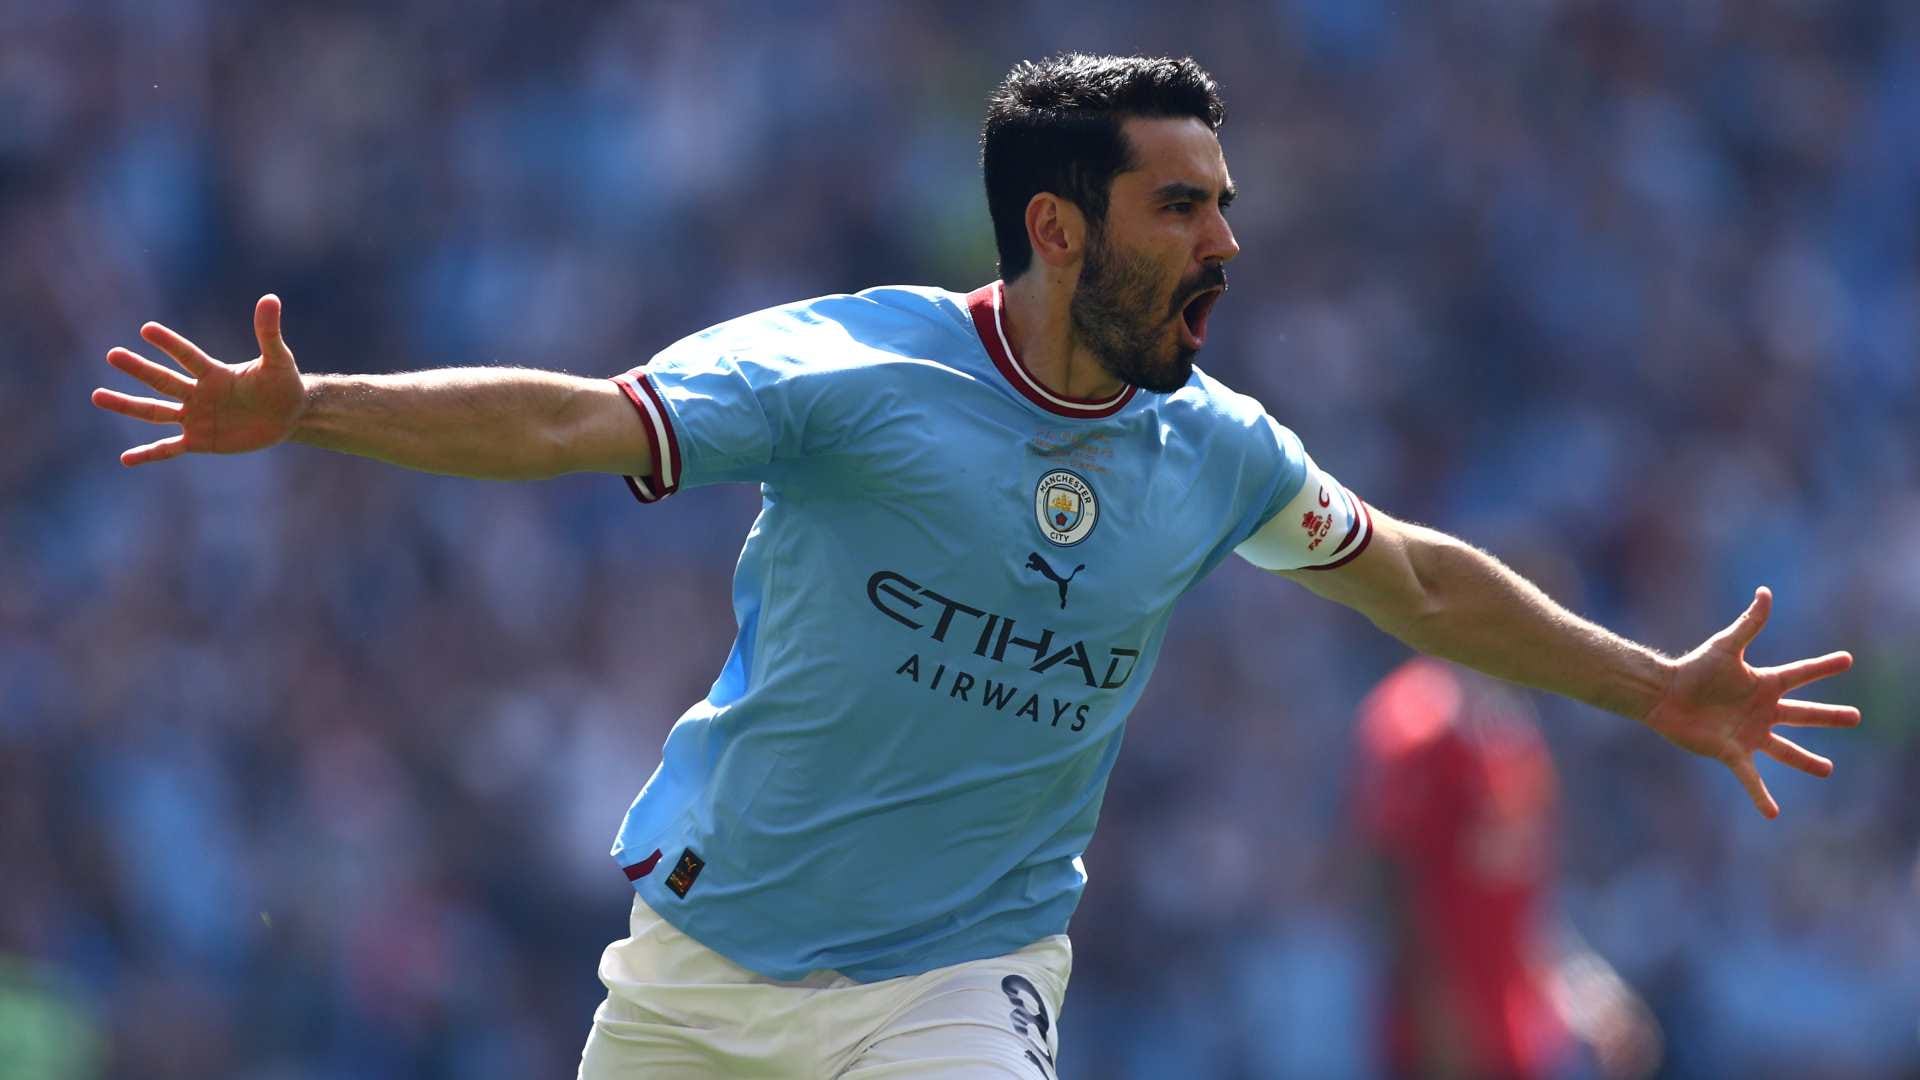 Explained: Why Man City hero Ilkay Gundogan did NOT receive FA Cup winner's medal after brilliant brace in final victory over Man Utd